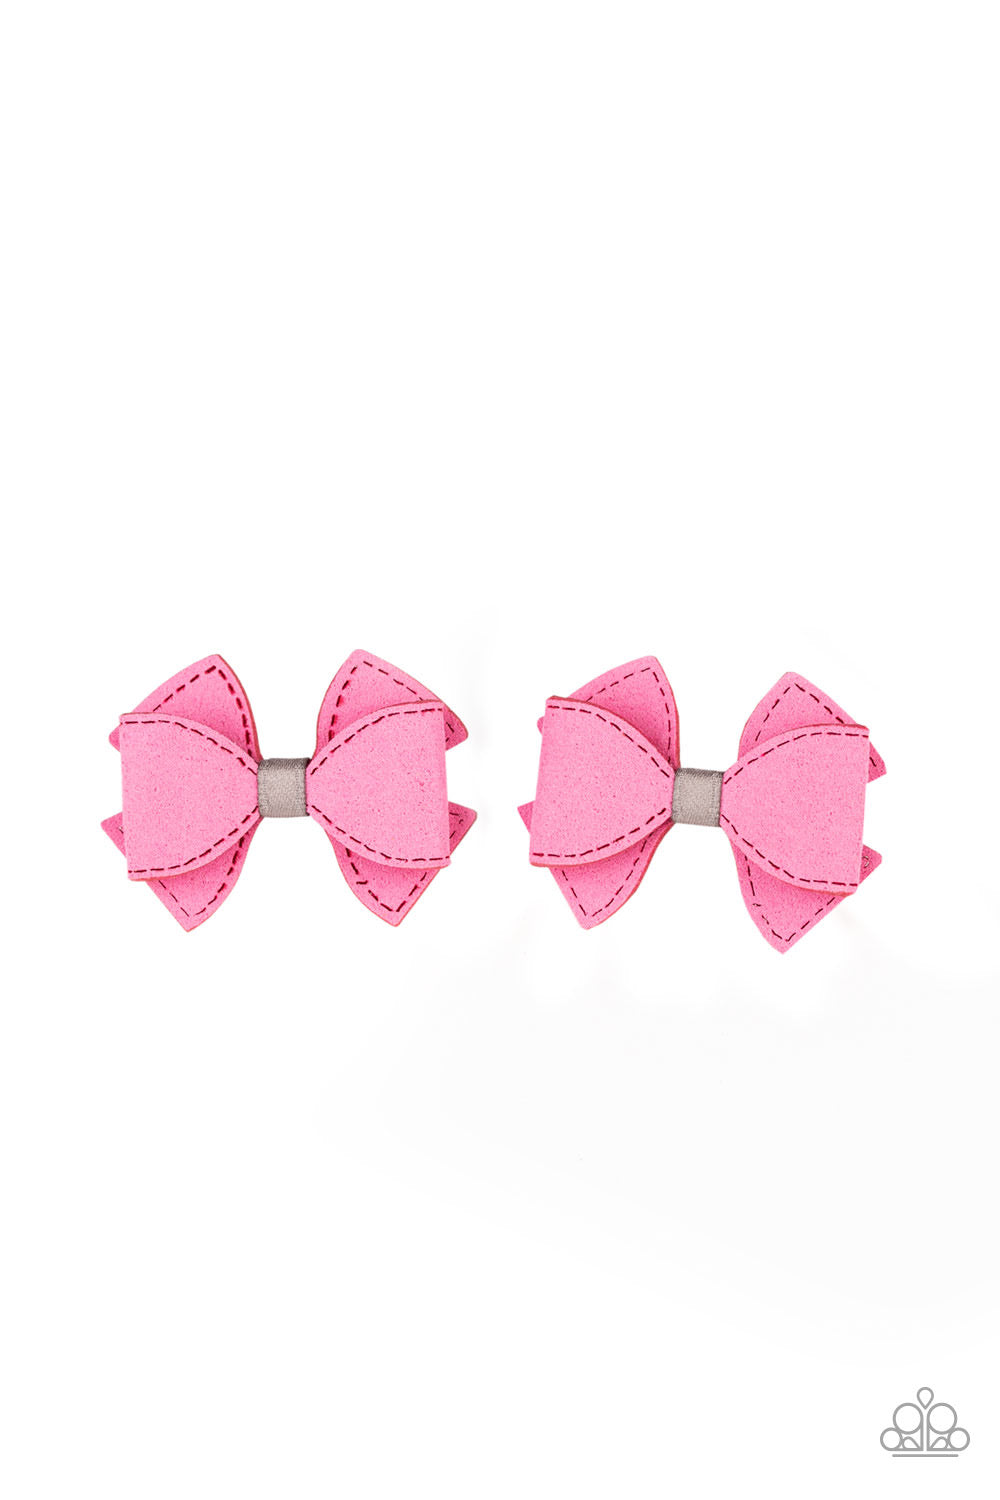 Boots and Bows - Pink Hair Clip 802h